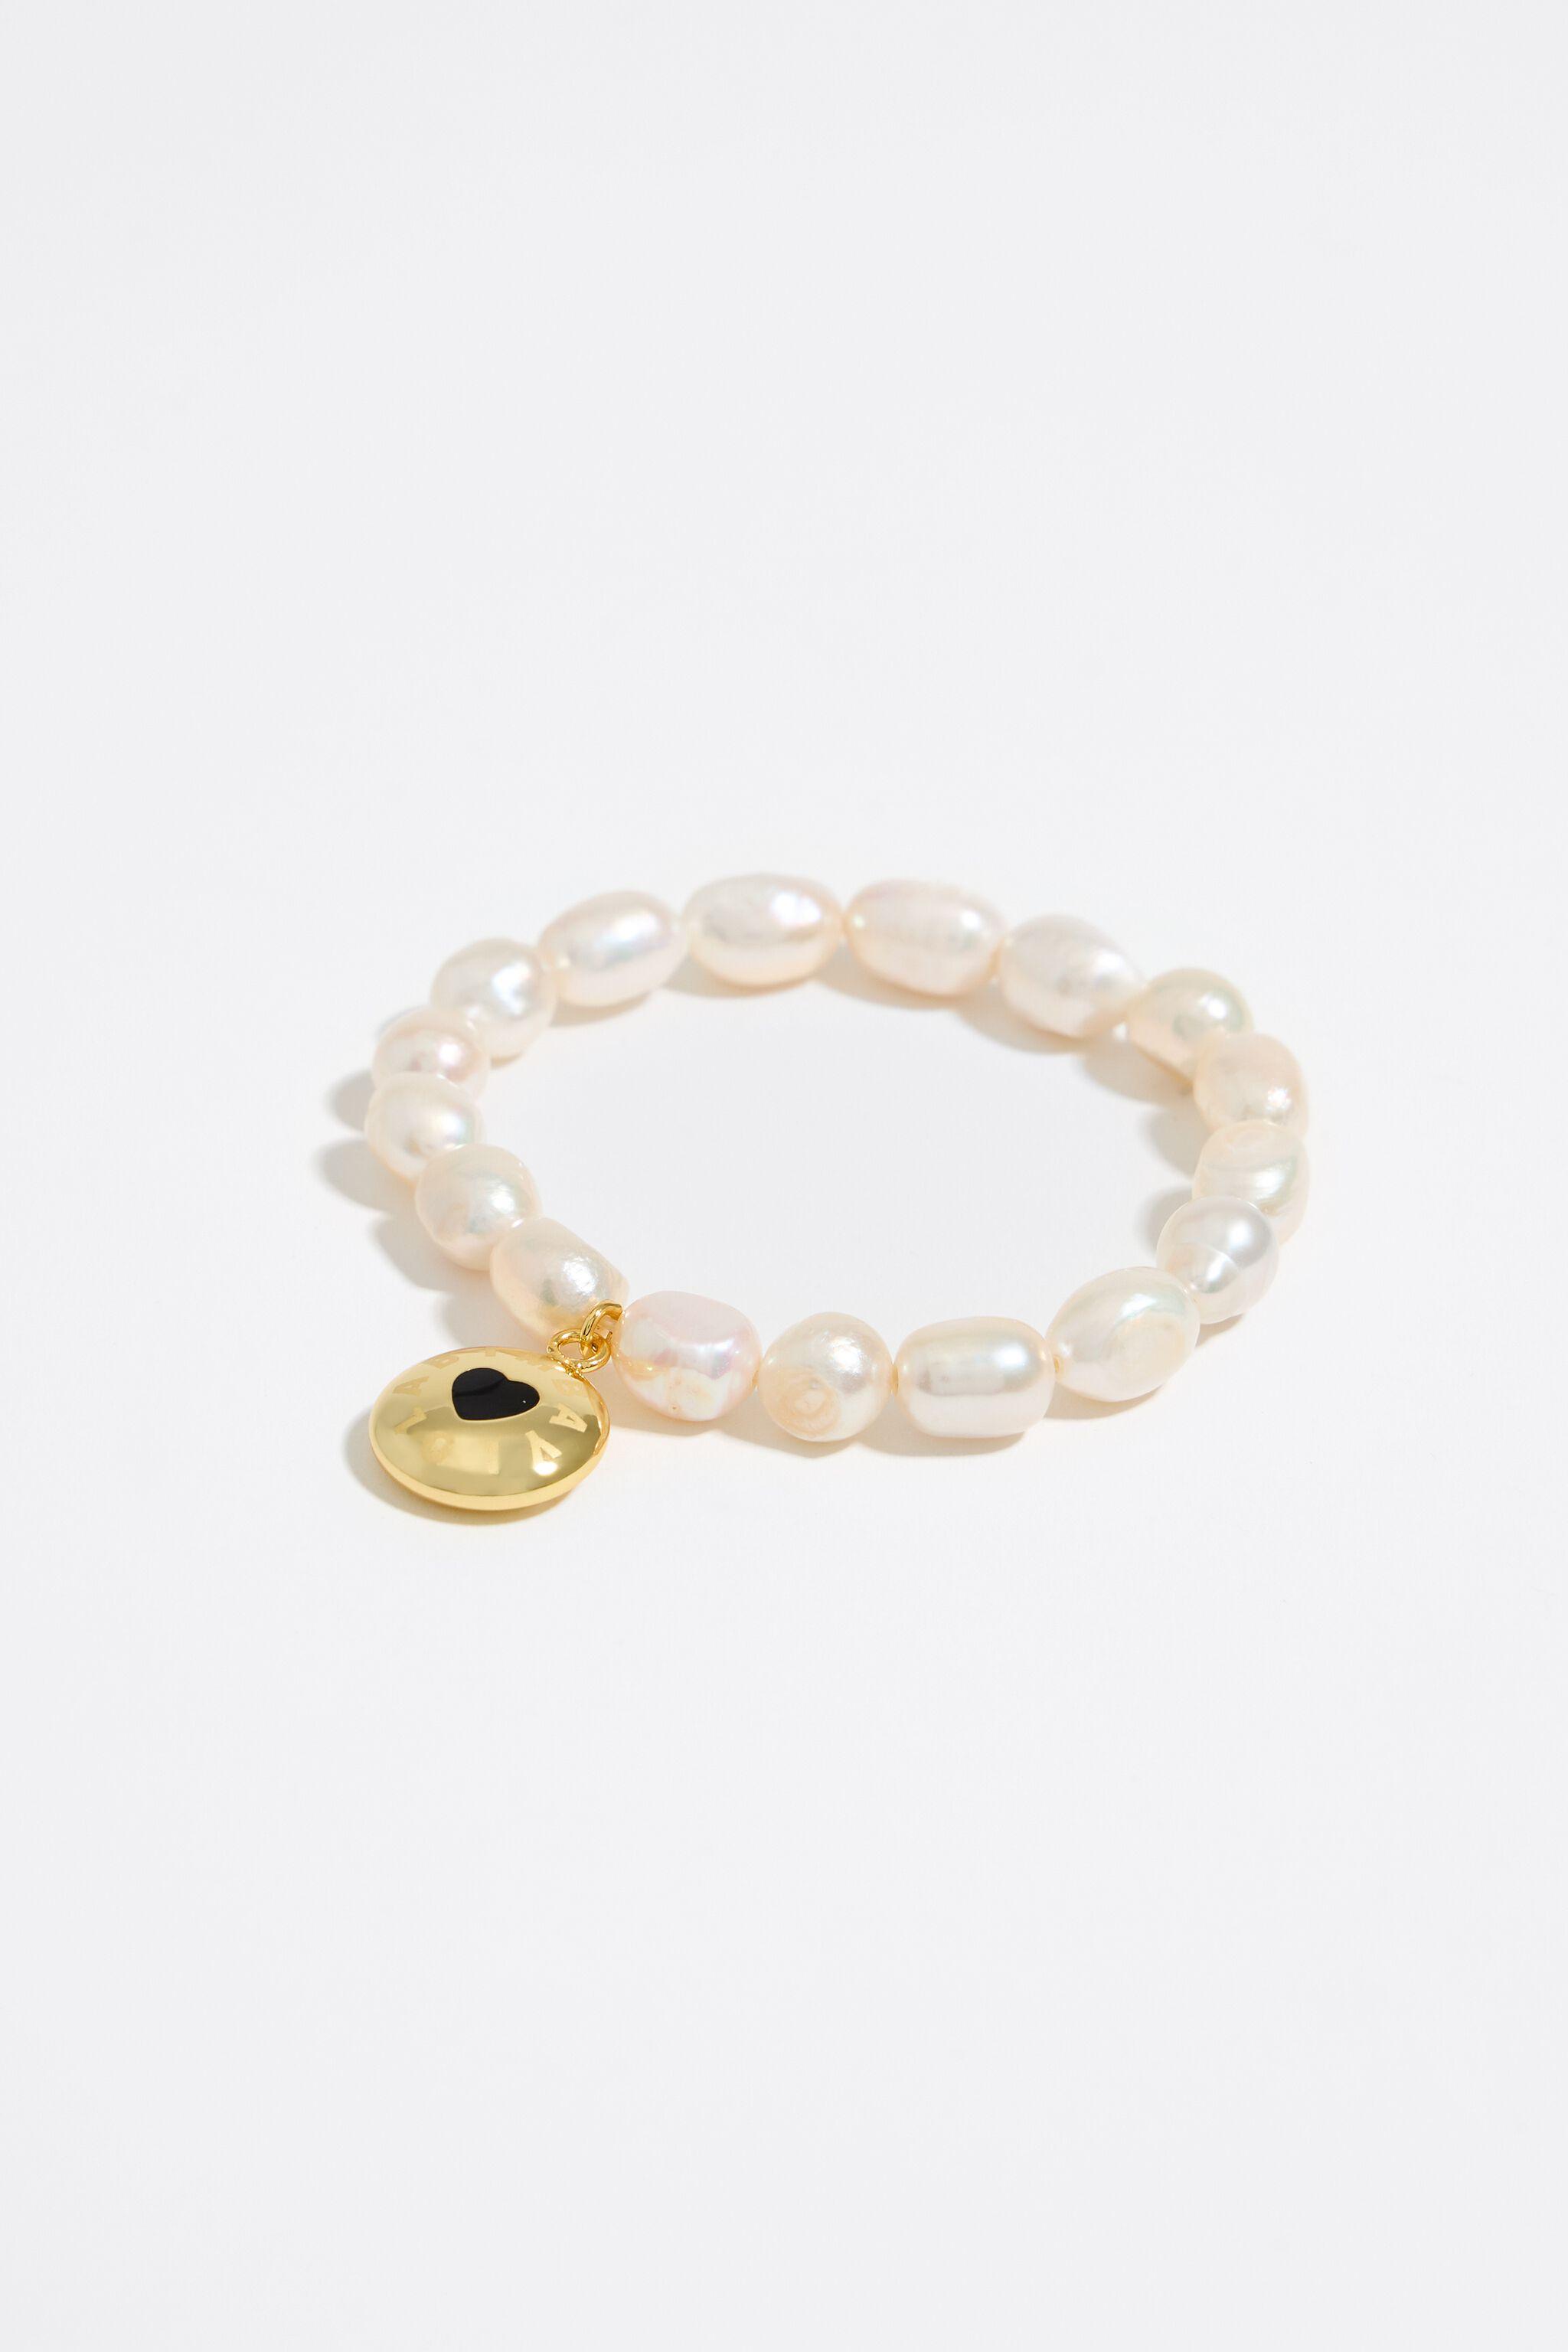 Personalized freshwater white pearls bracelet with monogrammed initials in  heart shape.